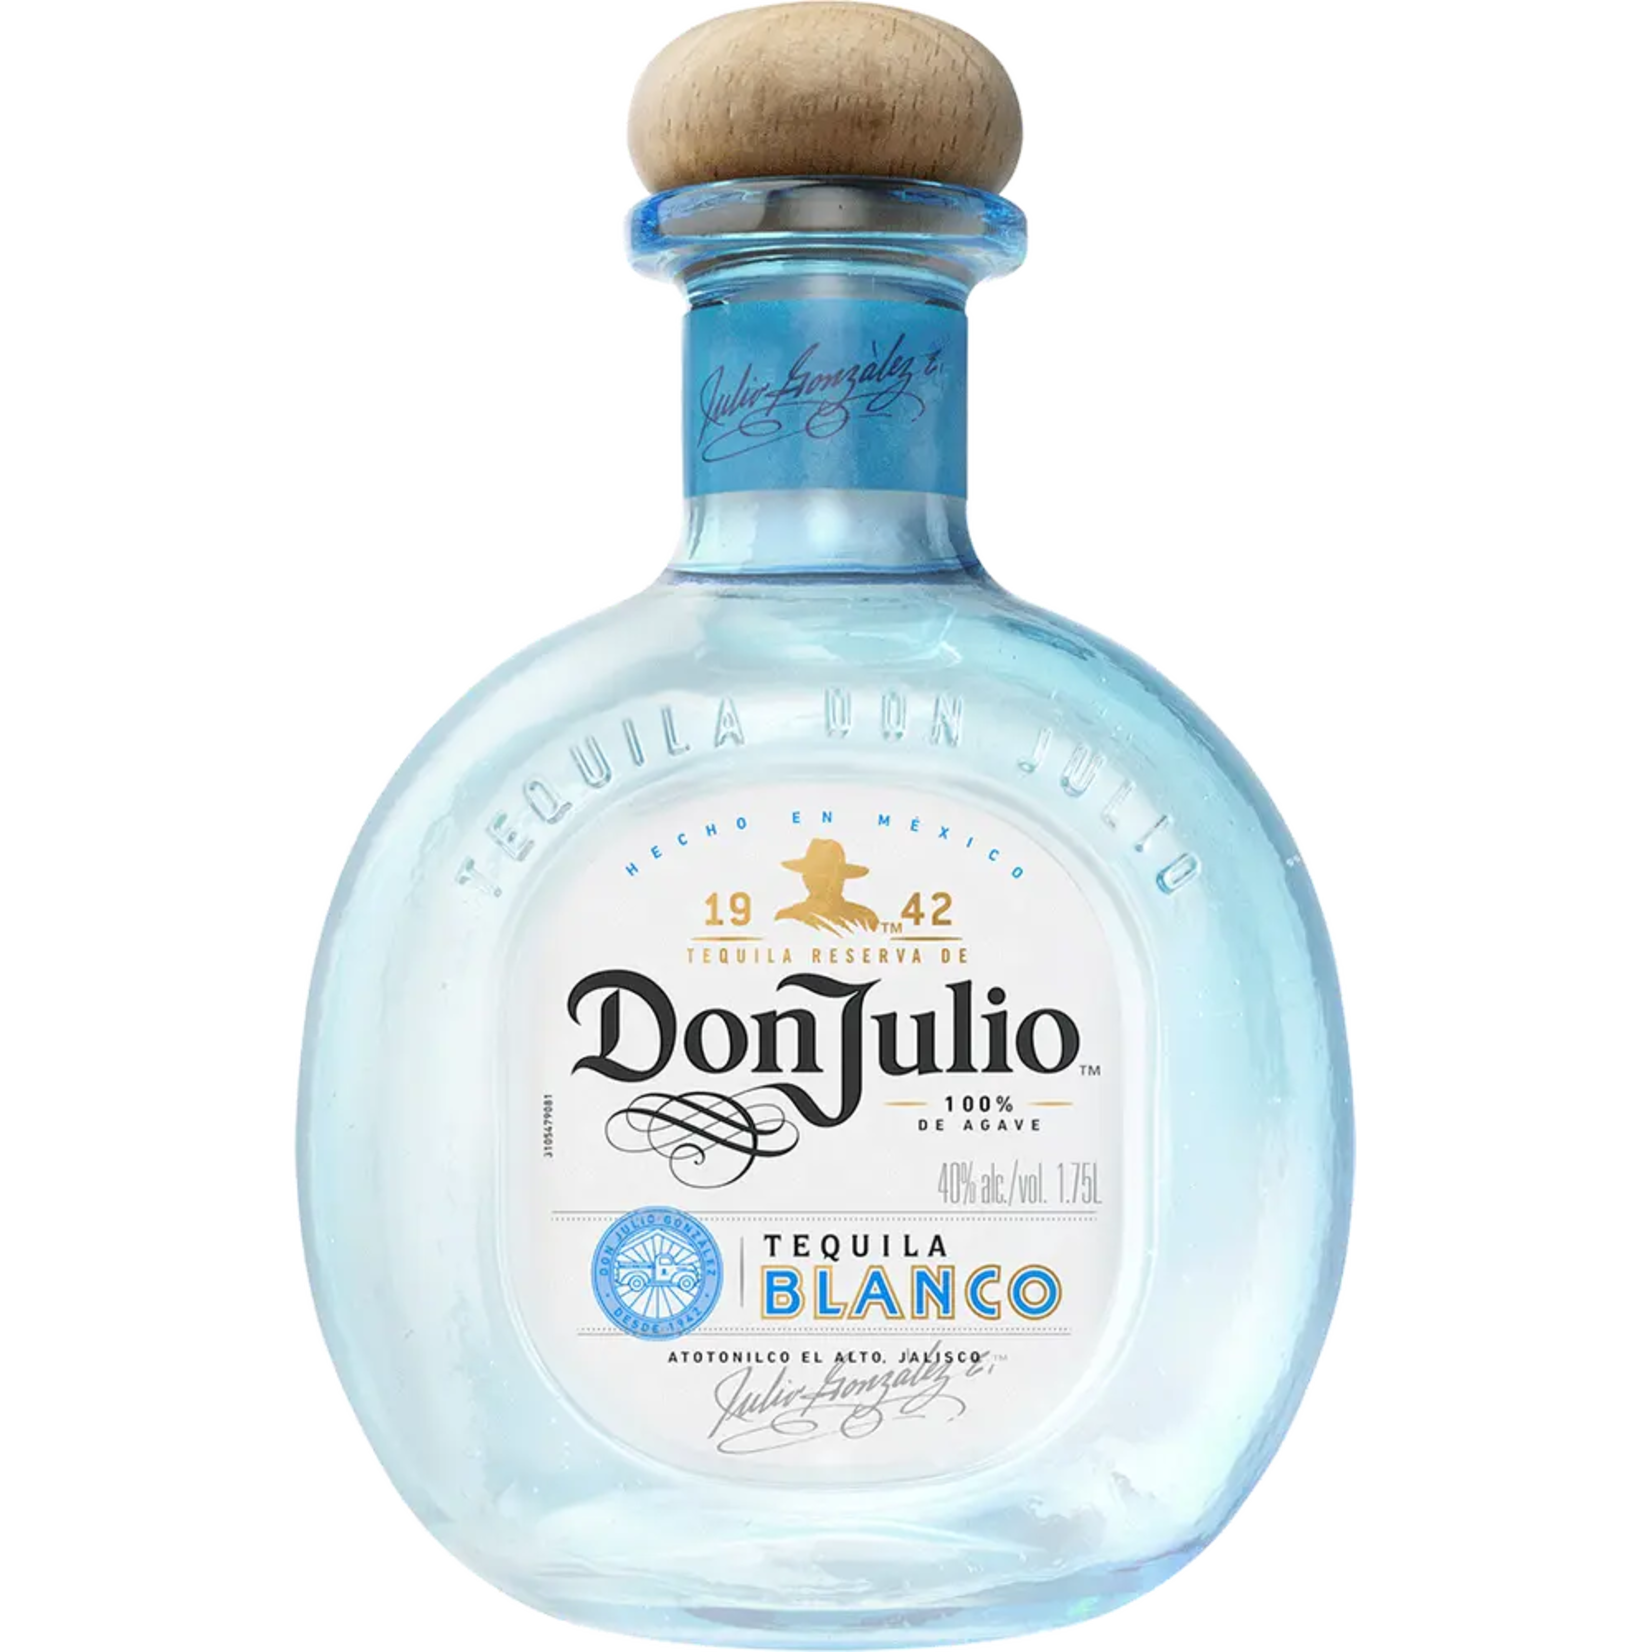 Don Julio Don Julio Blanco Tequila 80Proof 1.75 Ltr